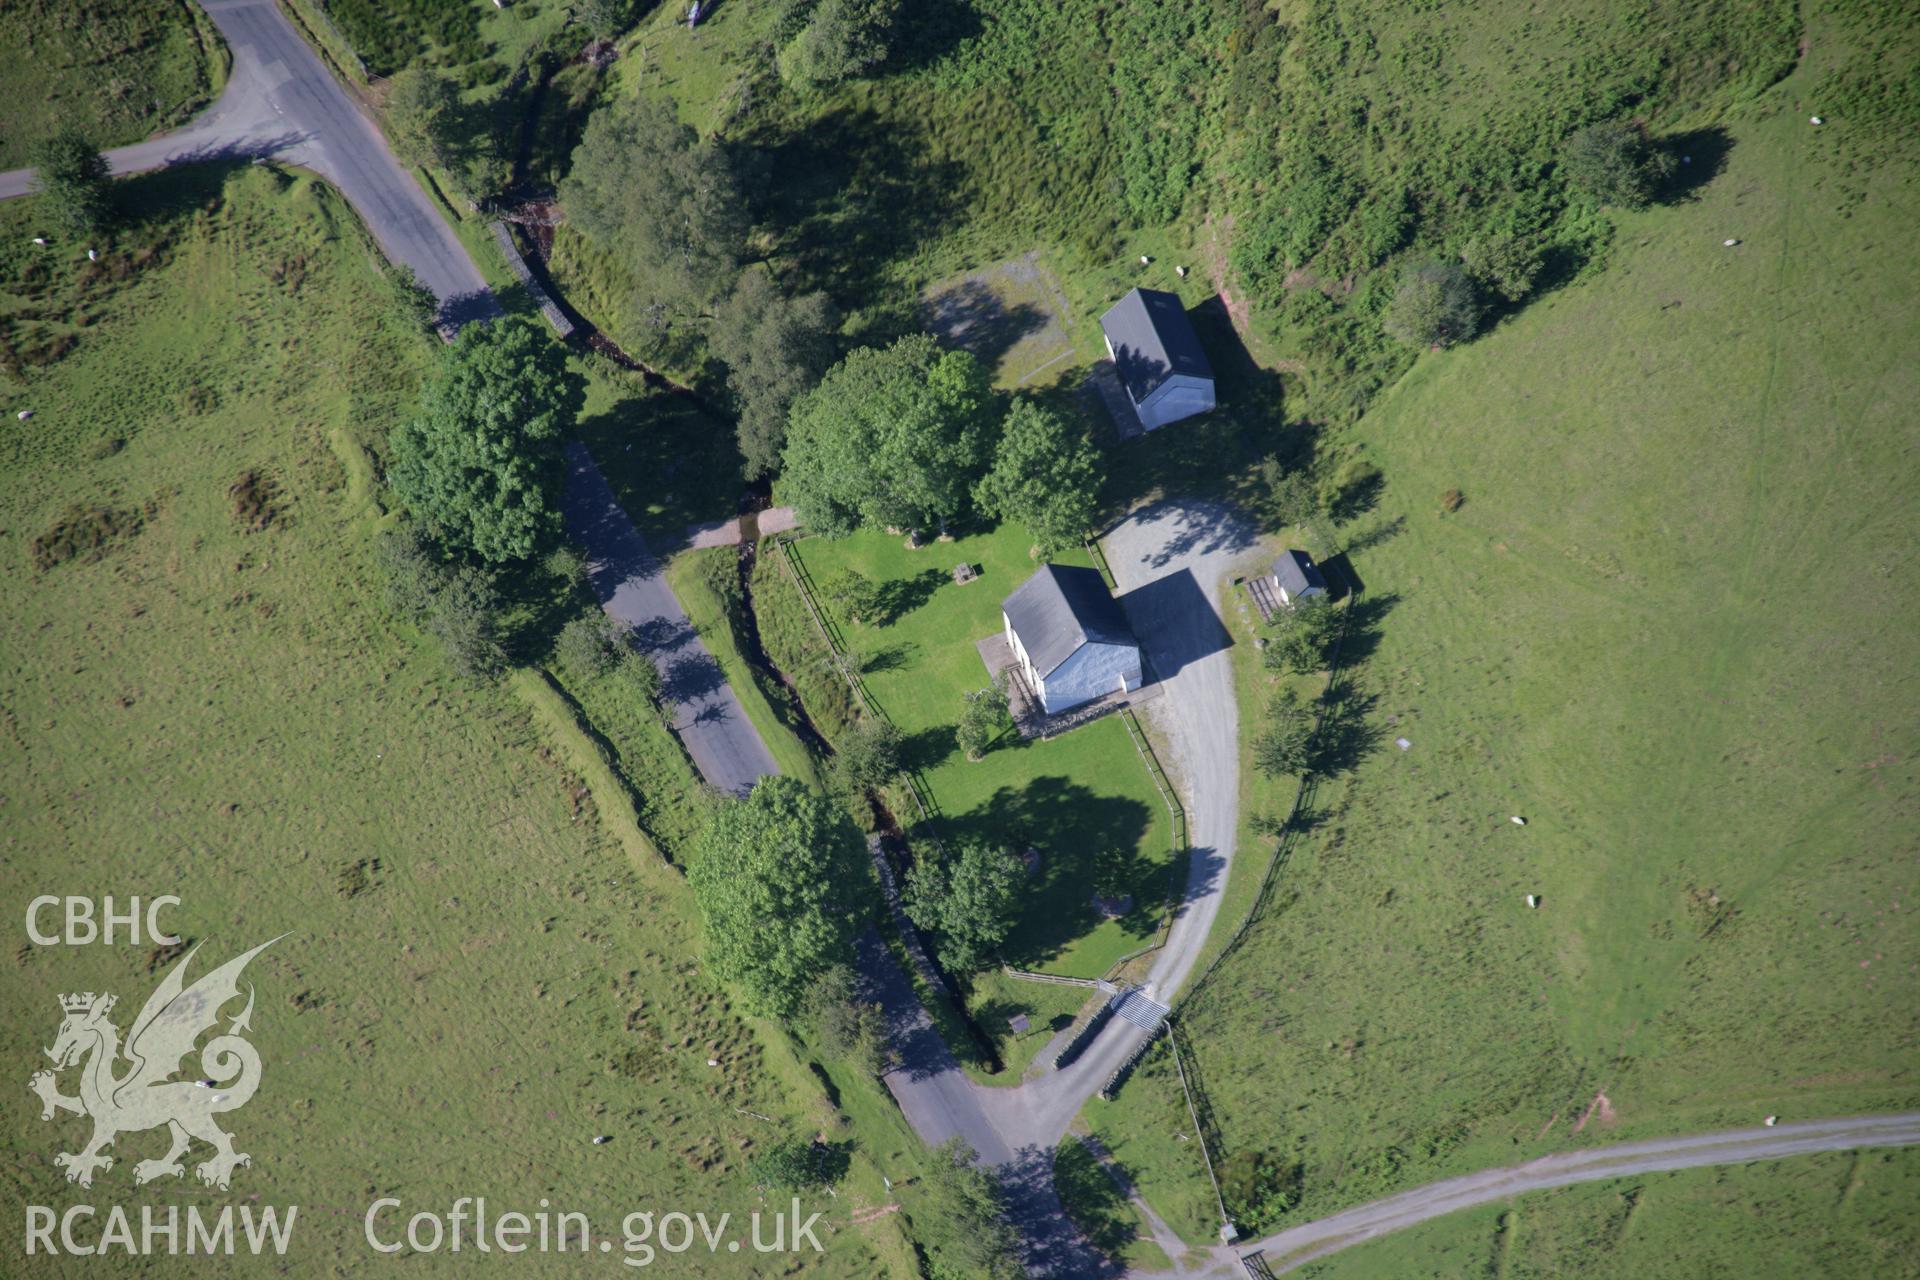 RCAHMW colour oblique aerial photograph of the army visitor centre in the former Disgwylfa Farmstead. Taken on 08 August 2007 by Toby Driver